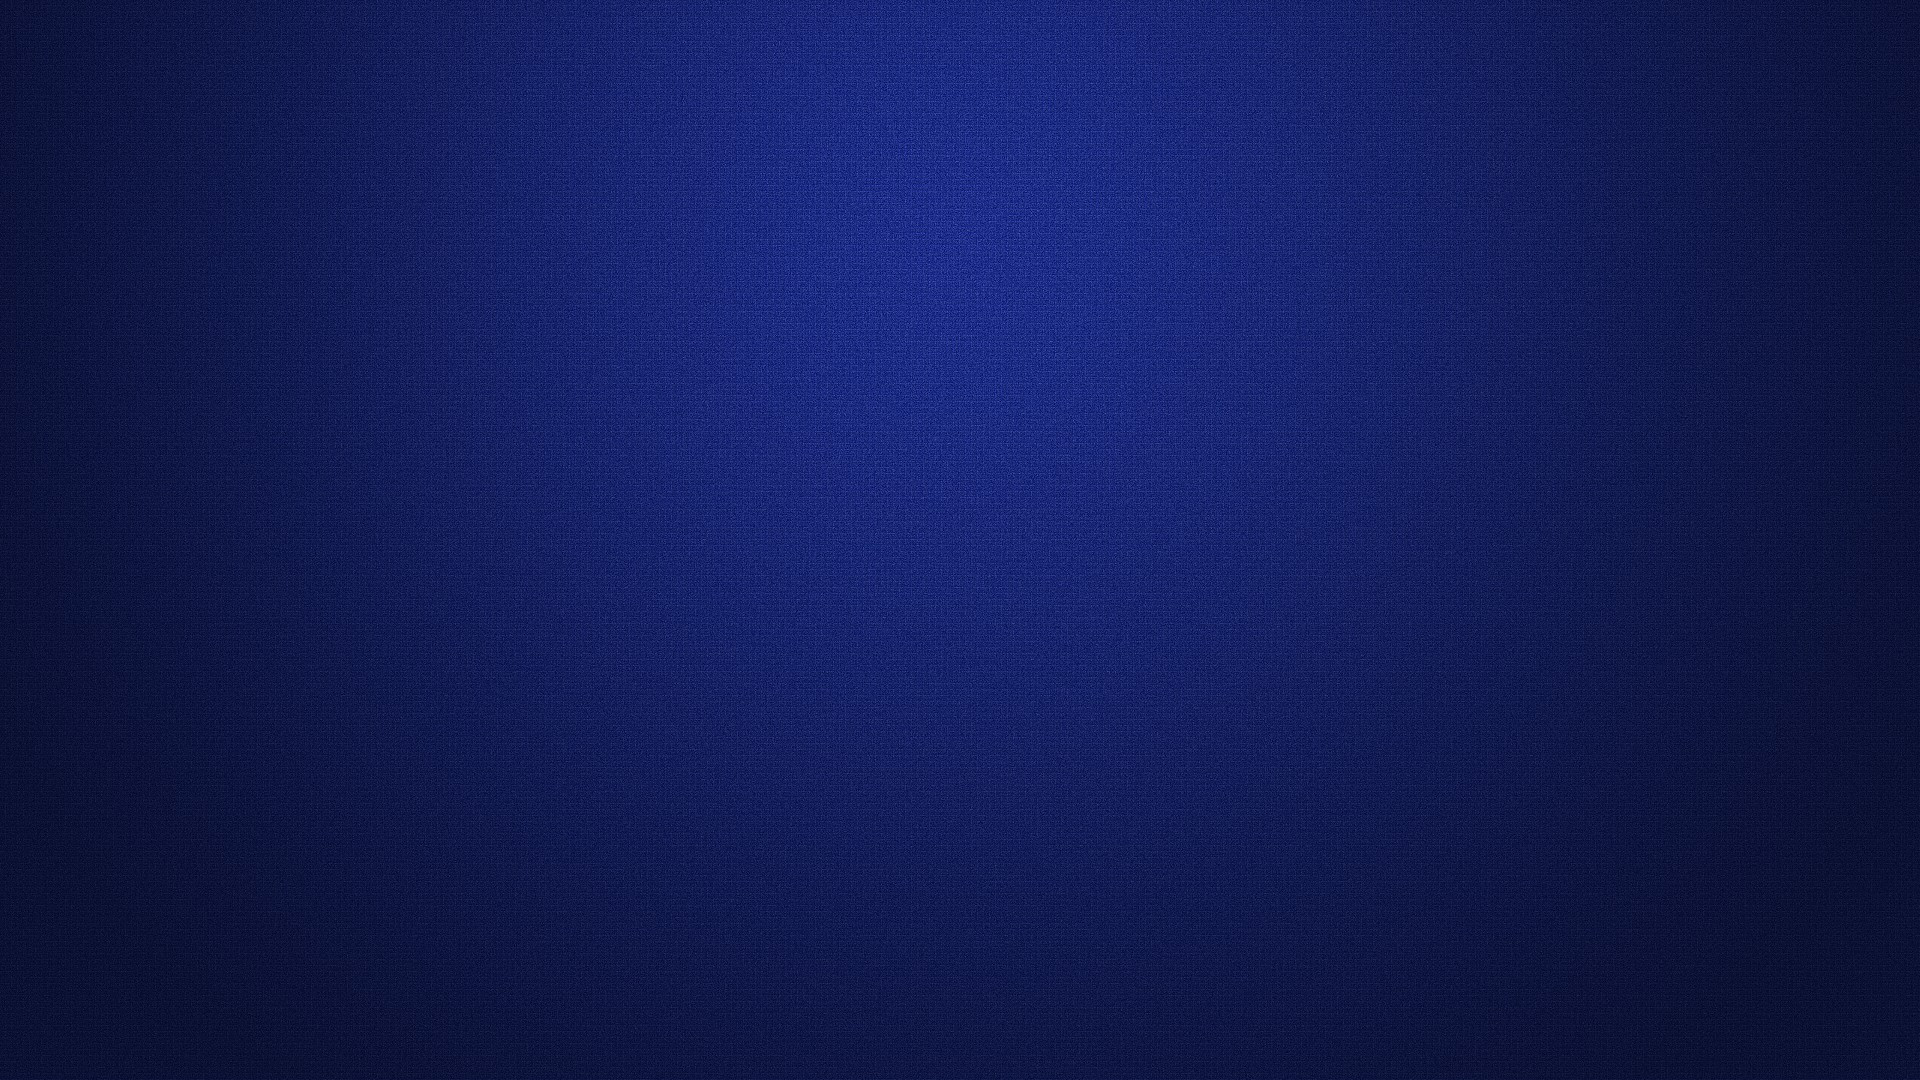 Cool Blue Wallpaper For Desktop with high-resolution 1920x1080 pixel. You can use and set as wallpaper for Notebook Screensavers, Mac Wallpapers, Mobile Home Screen, iPhone or Android Phones Lock Screen